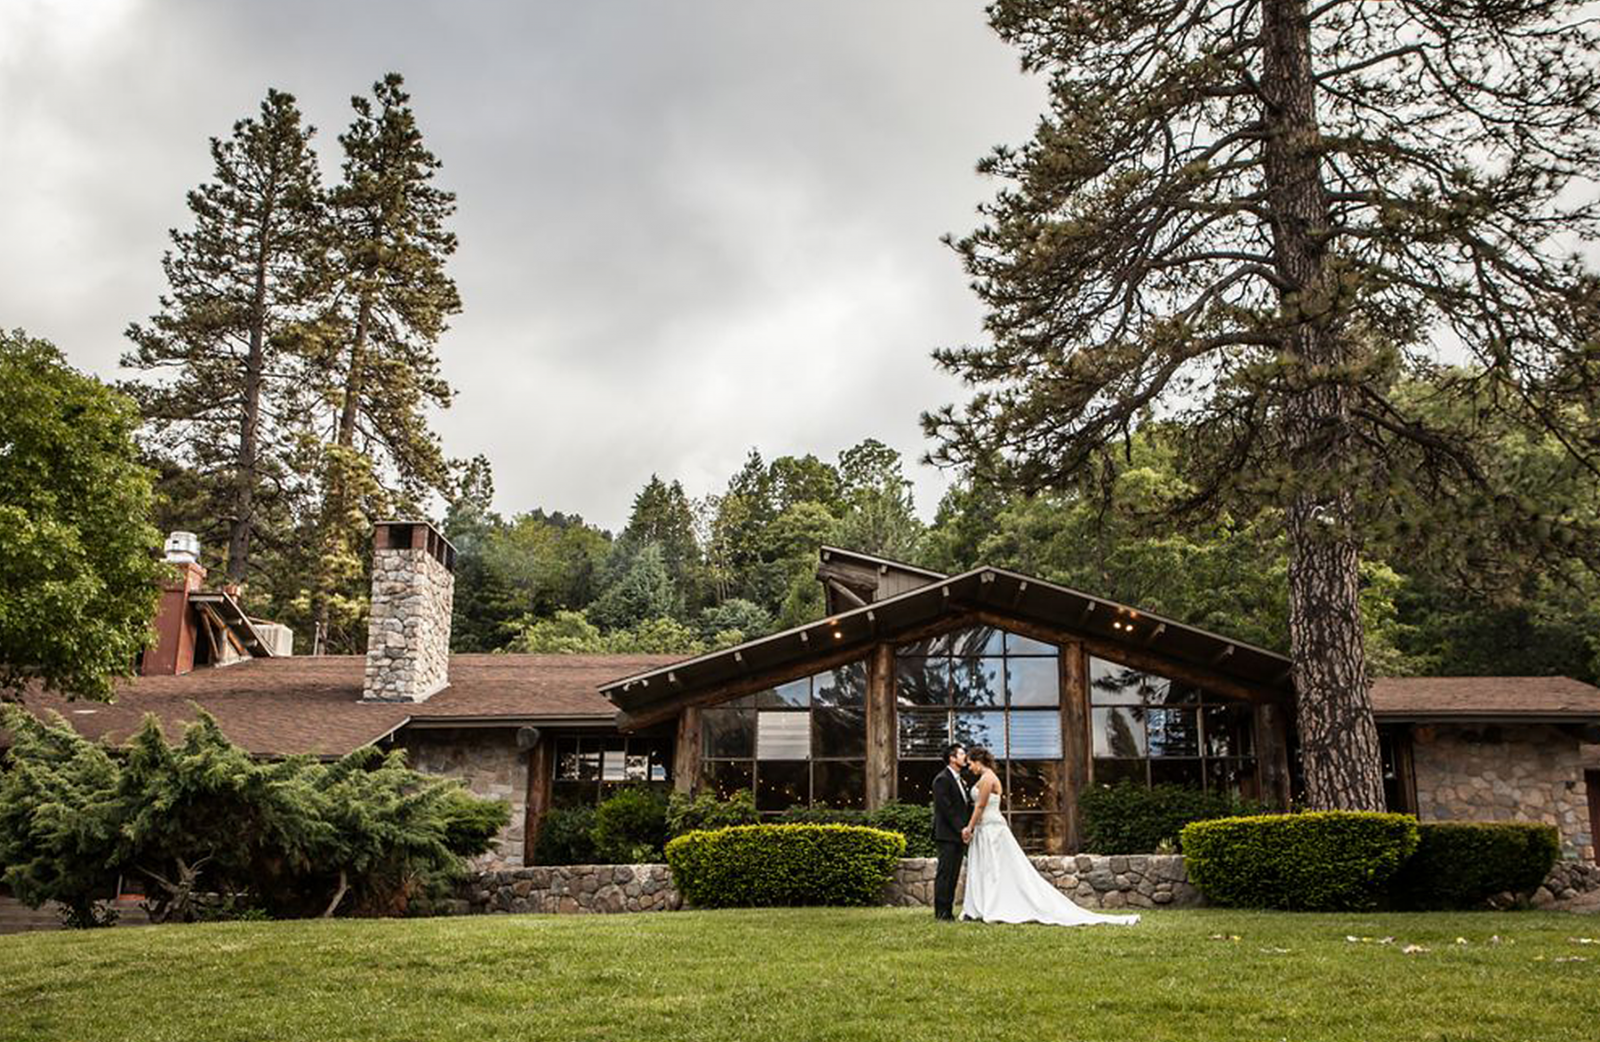 A man and woman on their wedding day as groom and bride kissing in front of the San Moritz lodge.